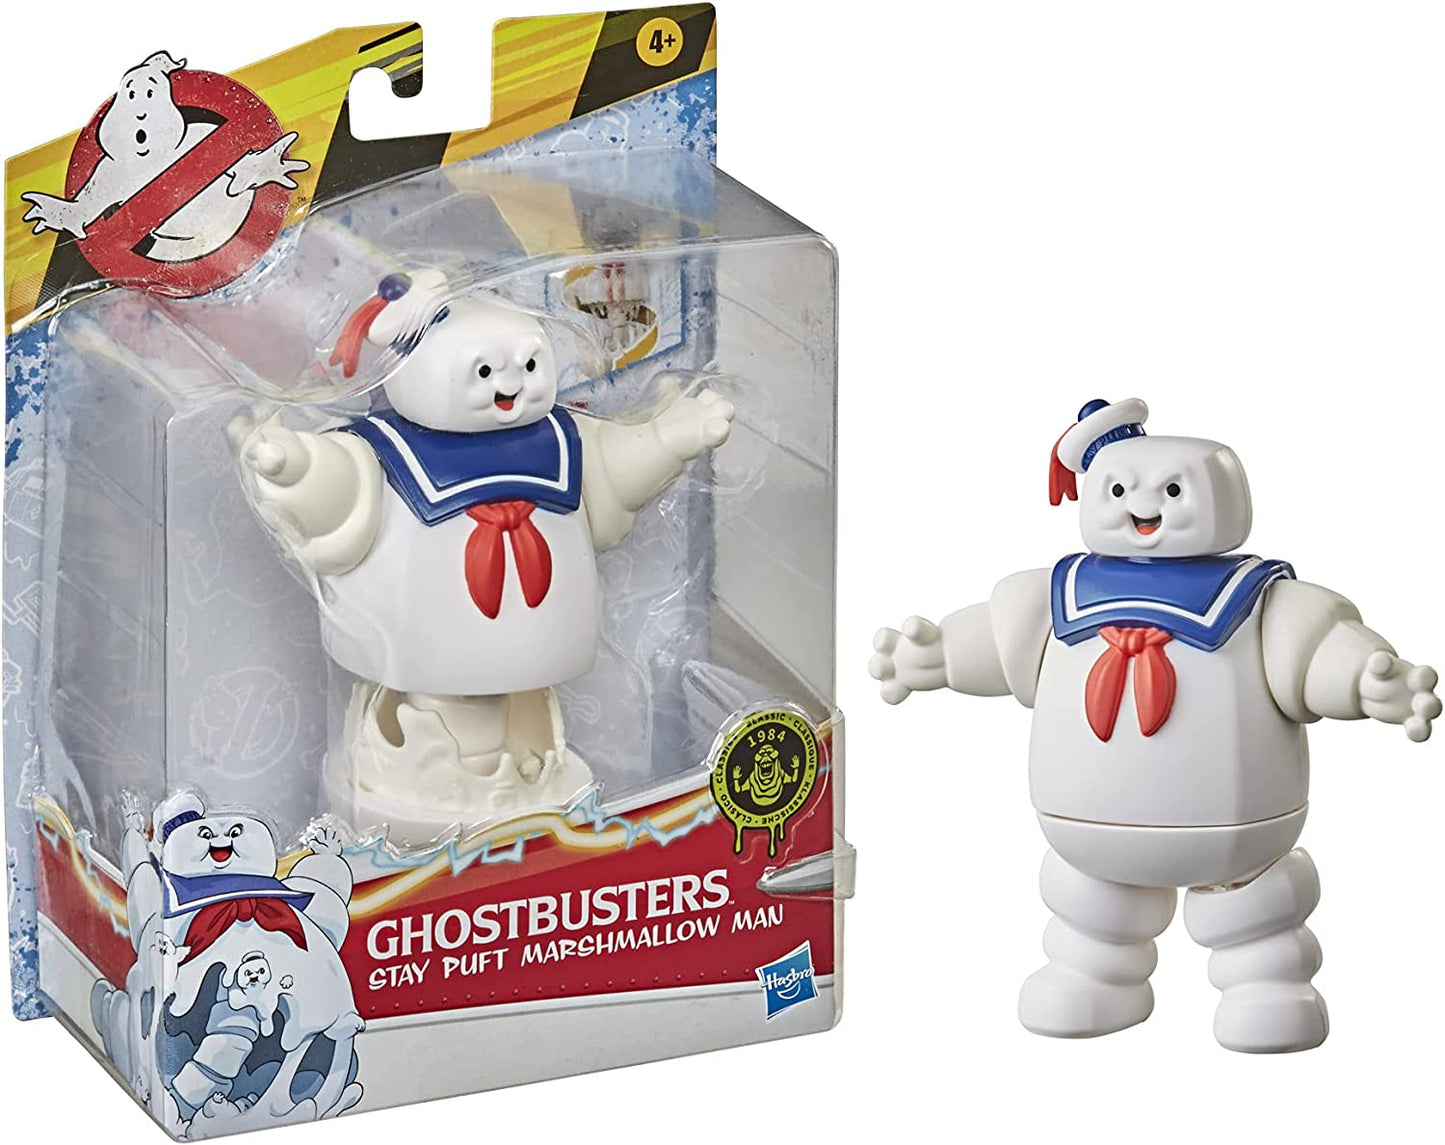 Stay Puft Marshmallow Man - Ghostbusters: Fright Feature Action Figure